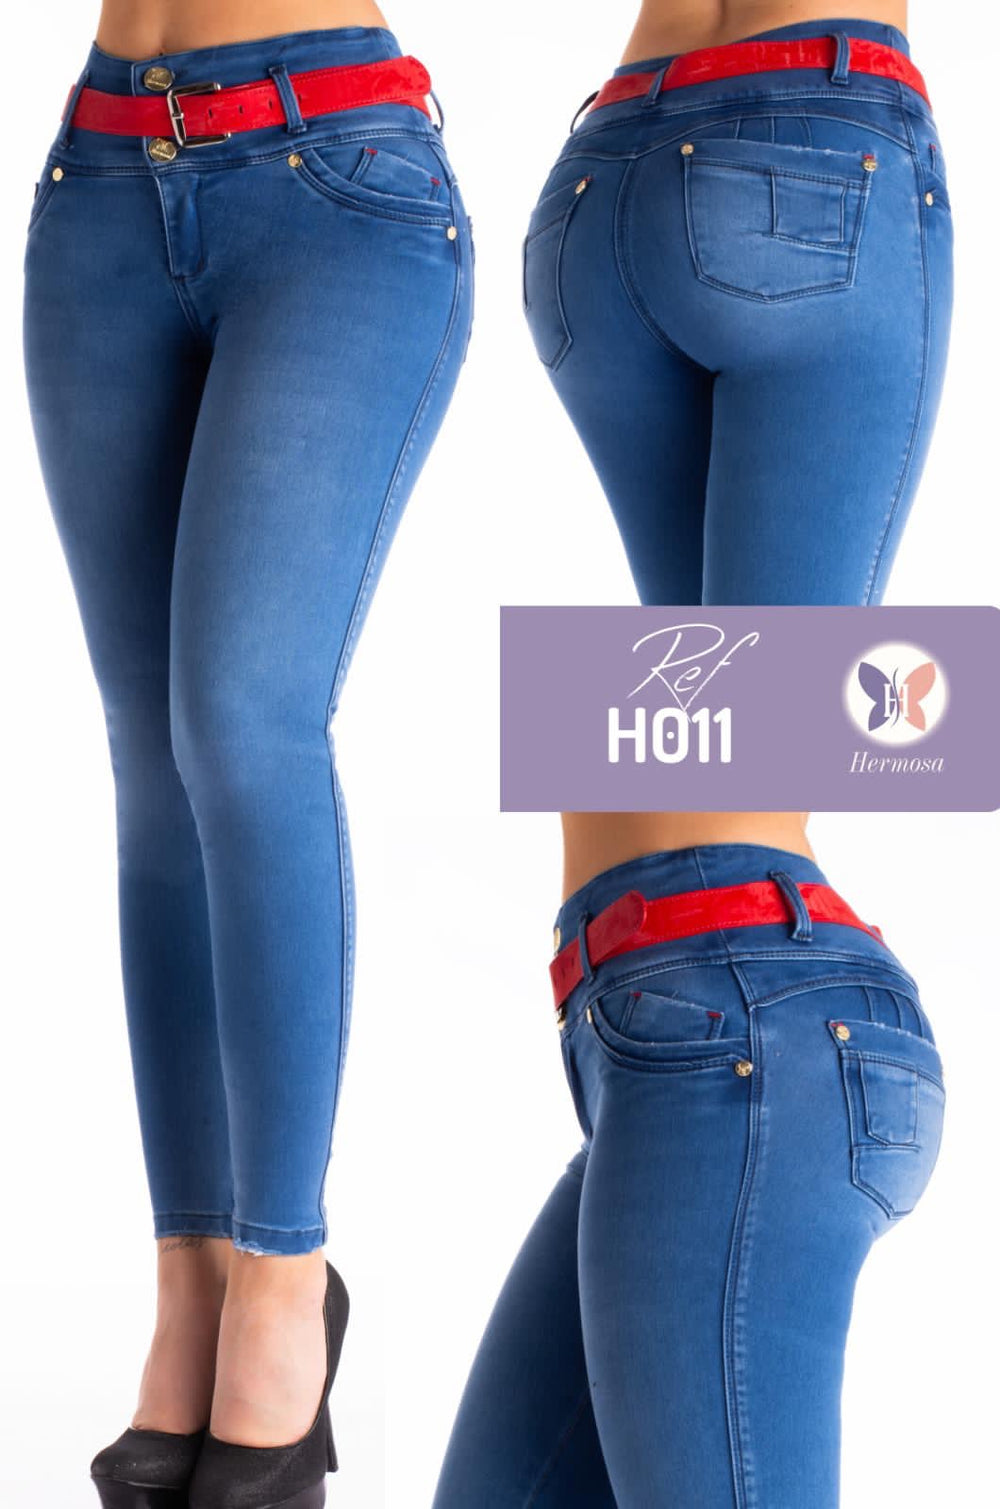 Dalila 100% Authentic Colombian Push Up Jeans 